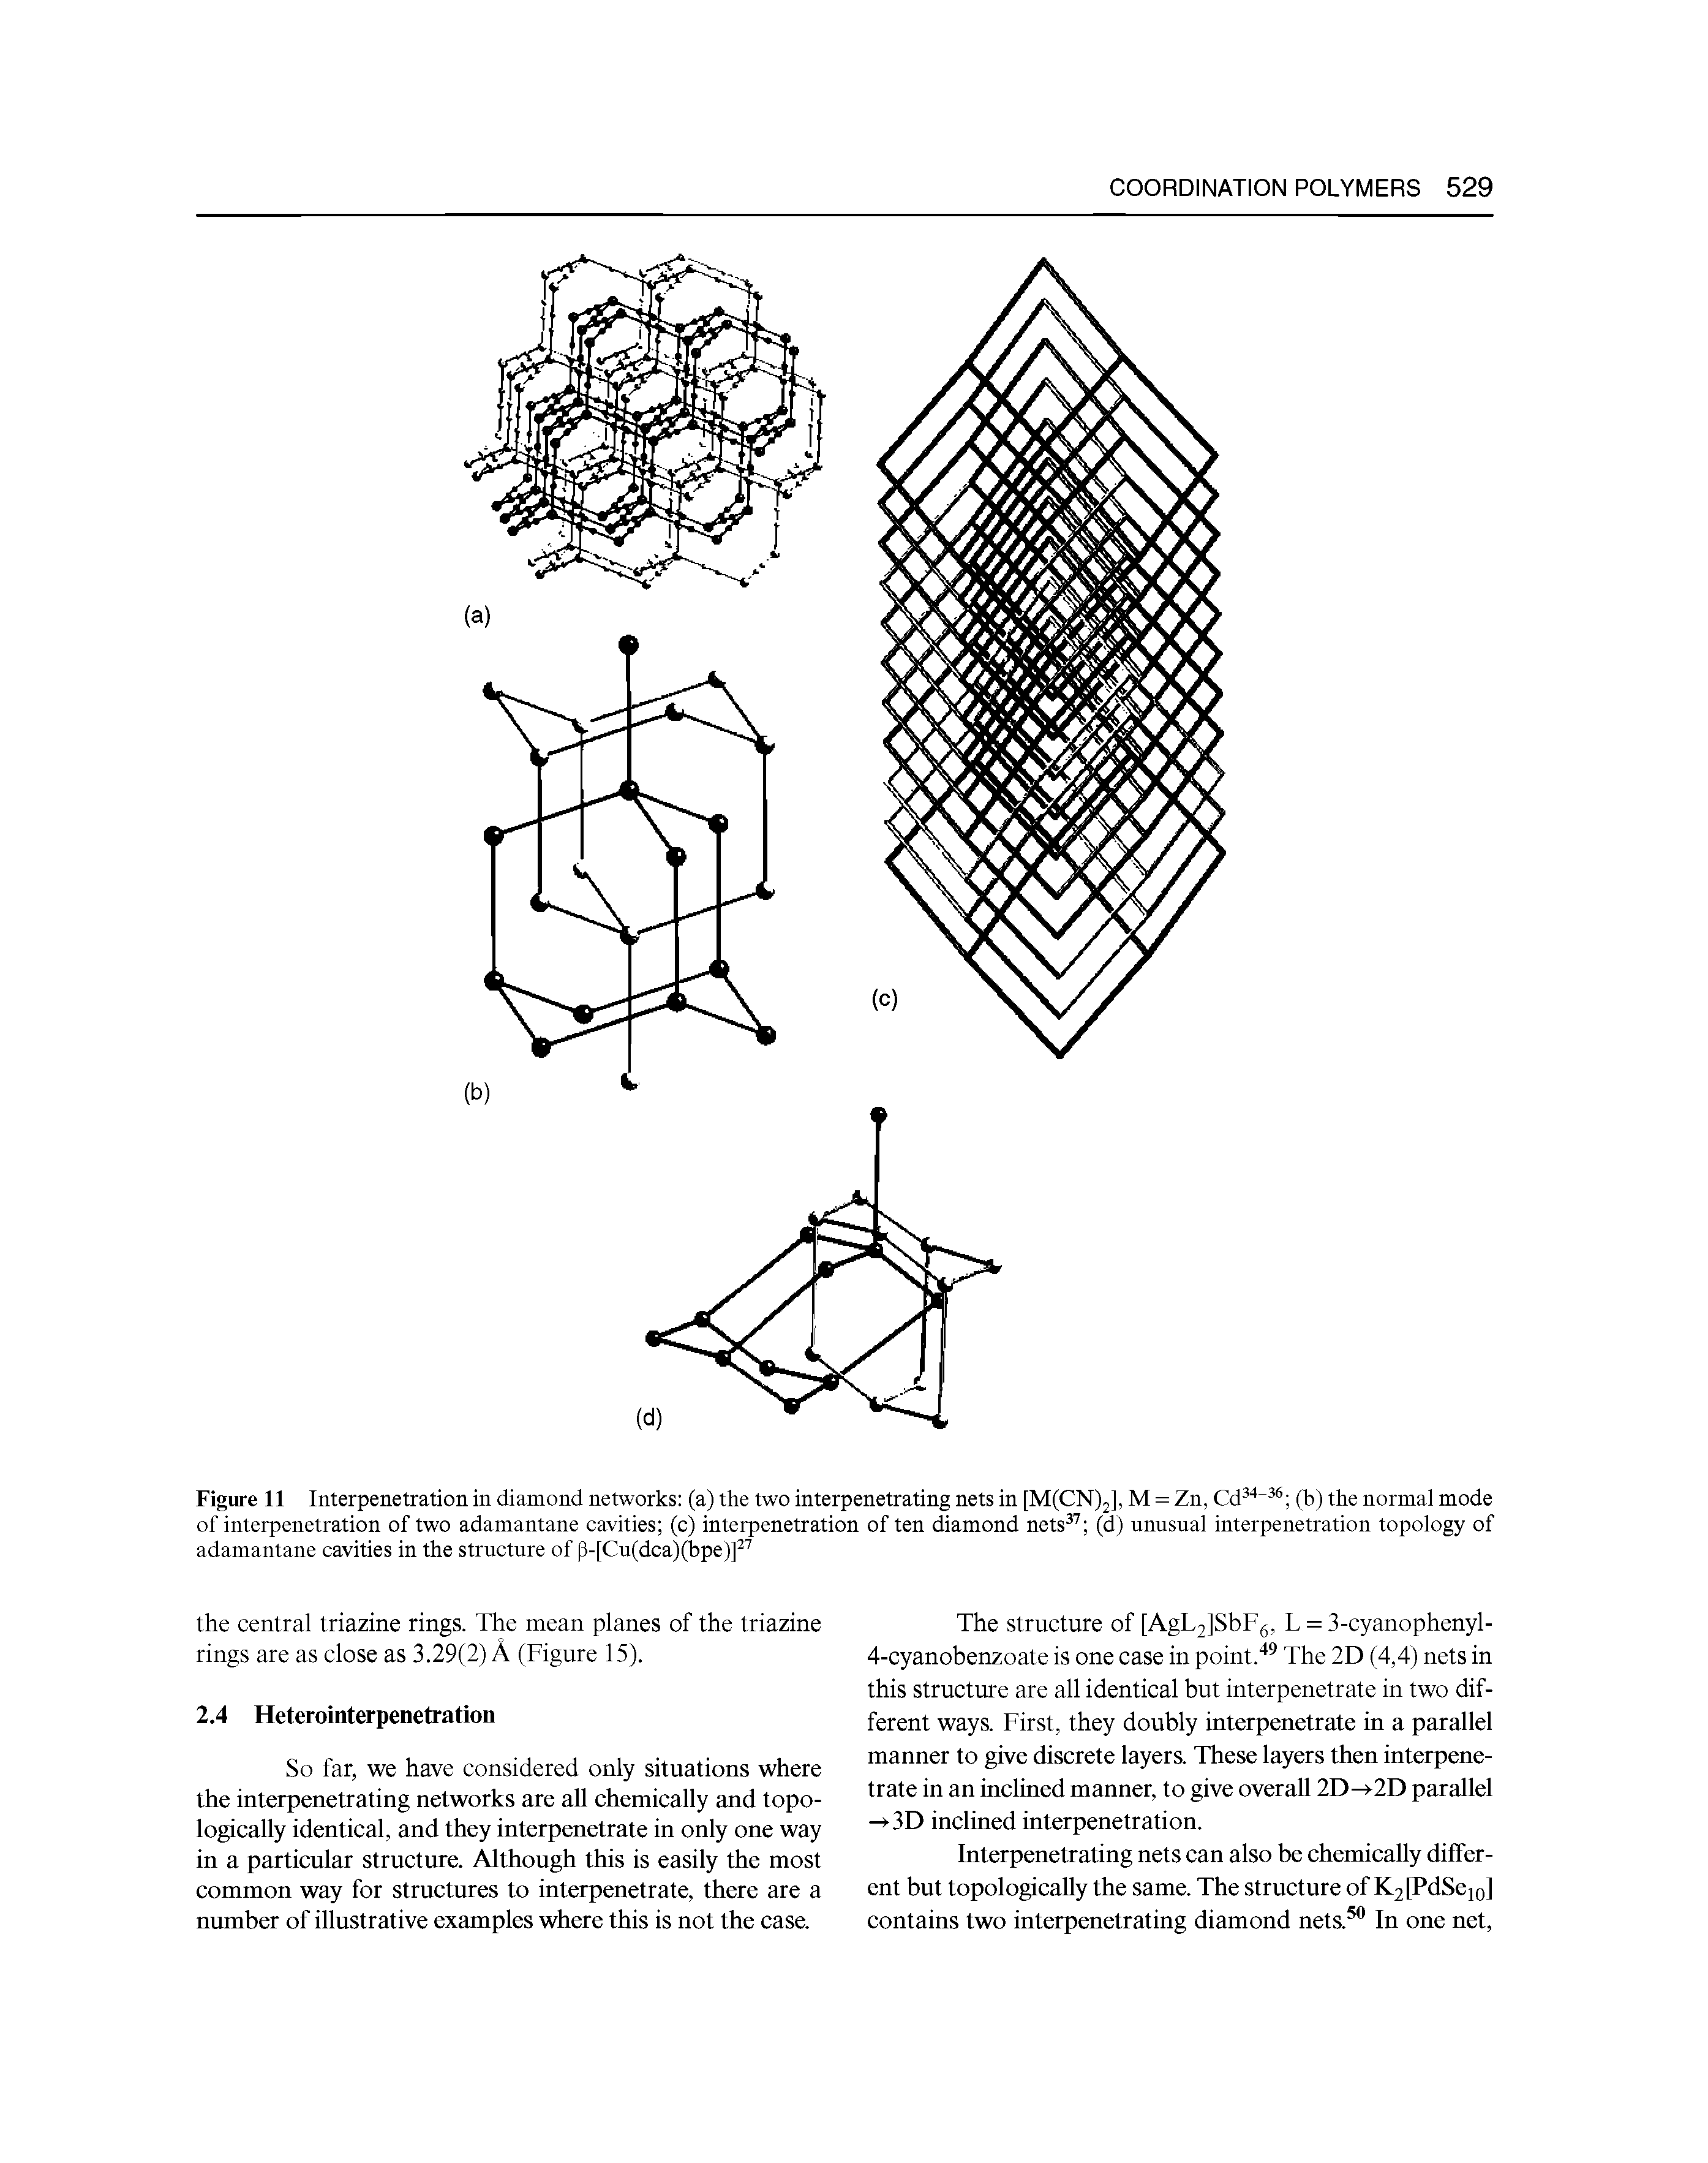 Figure 11 Interpenetration in diamond networks (a) the two interpenetrating nets in [M(CN)2], M = Zn, Cd (b) the normal mode of interpenetration of two adamantane cavities (c) interpenetration of ten diamond nets (d) unusual interpenetration topology of adamantane cavities in the structure of 3-[Cu(dca)(bpe)] ...